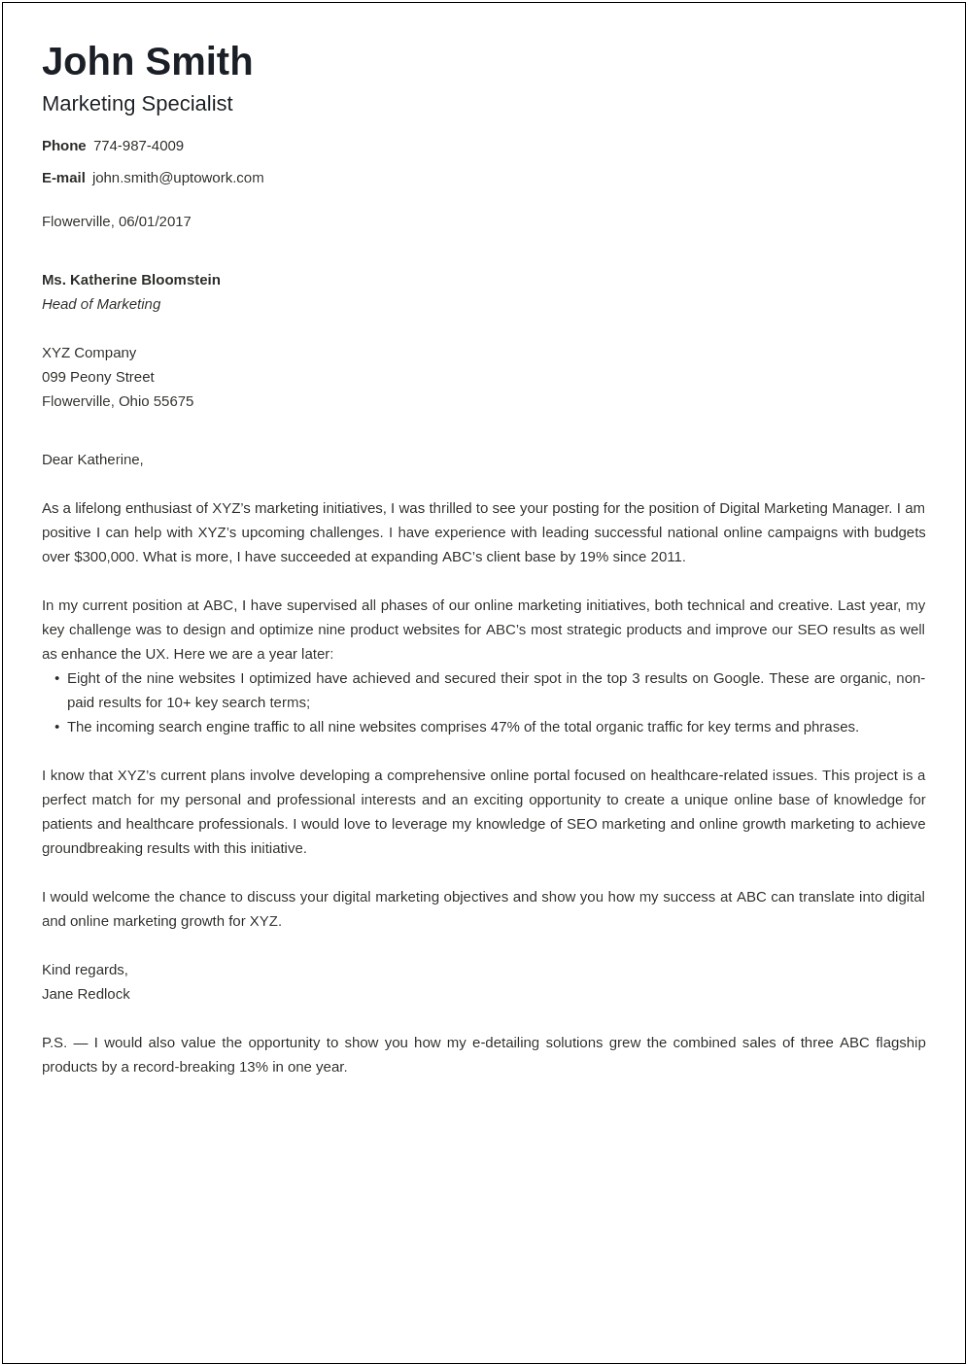 Application Letter Template Word Free Download